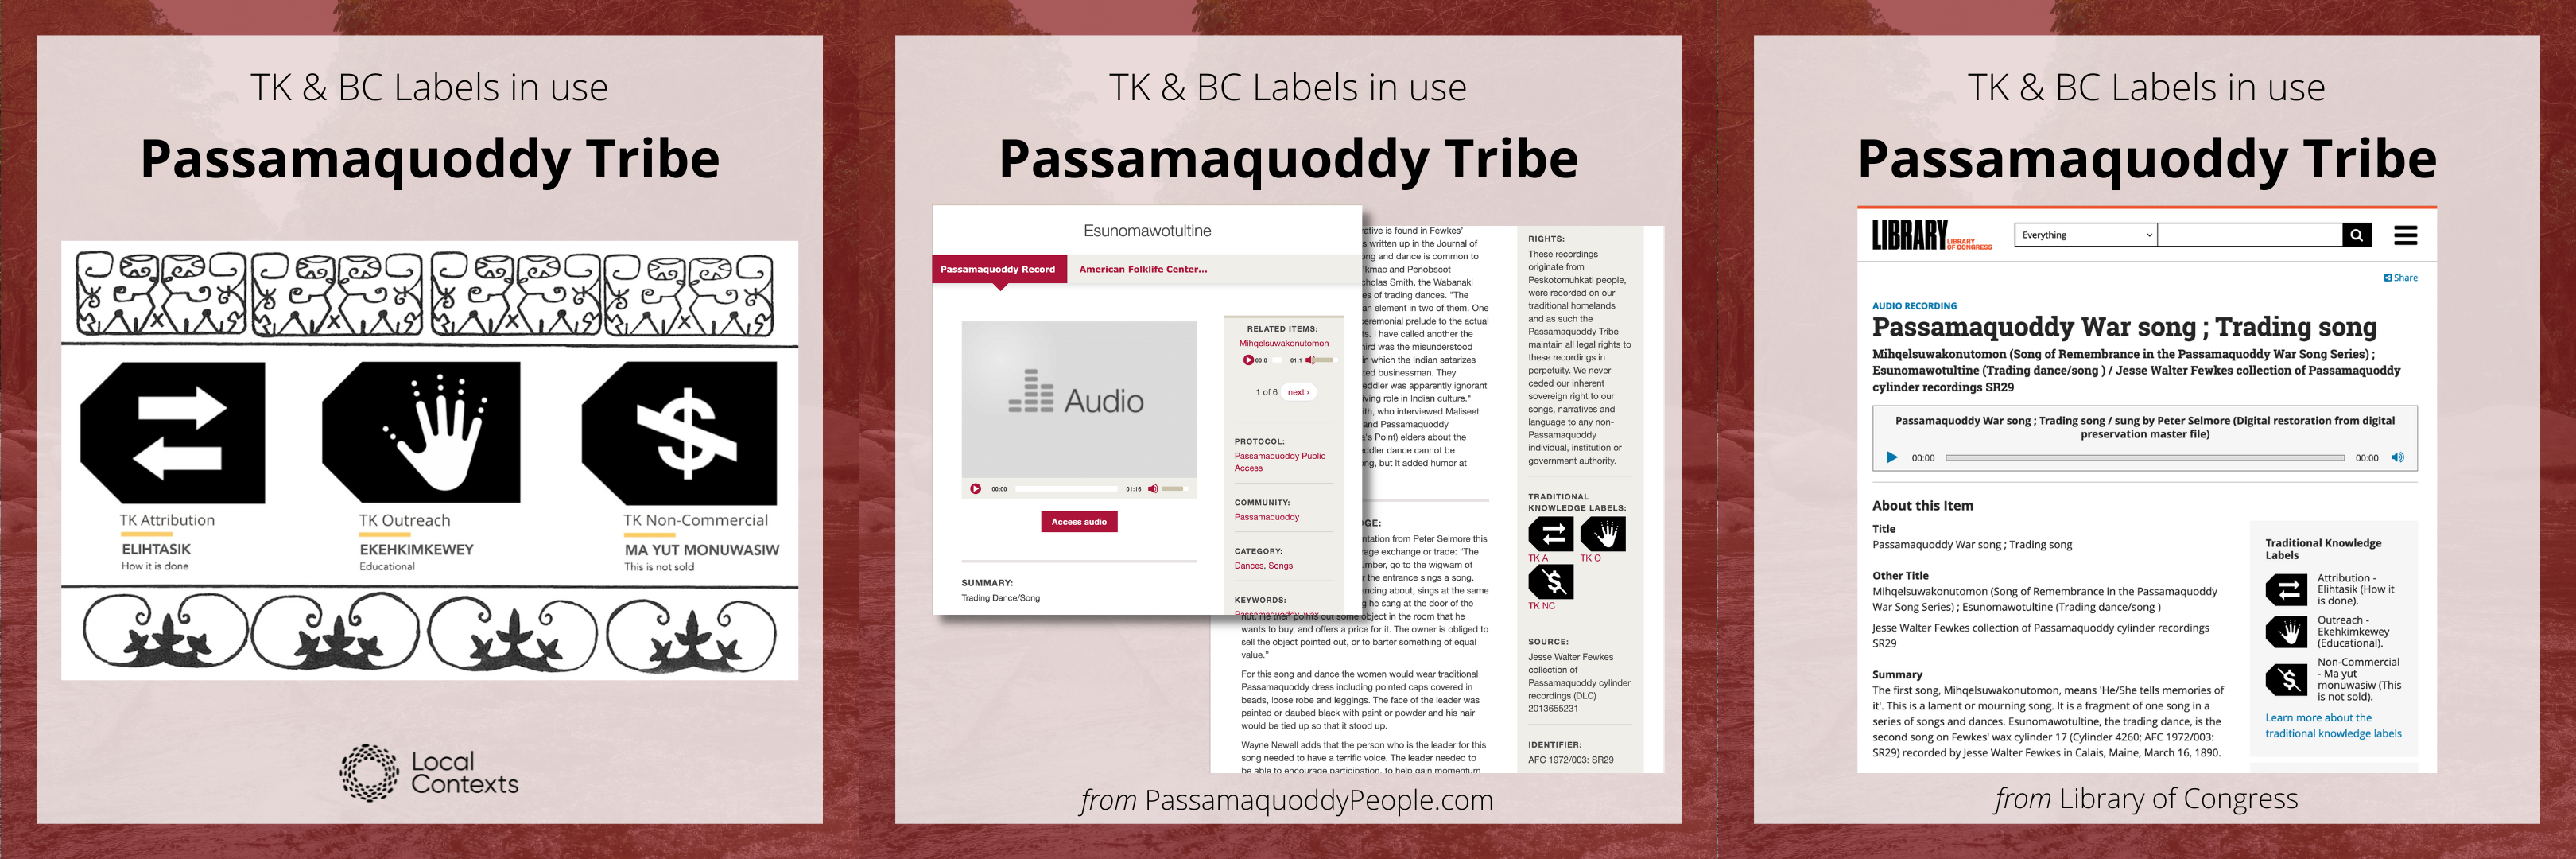 Three Image blocks. Image 1 - Black text and icon on a decorative red background. “TK & BC Labels in use. Passamaquoddy Tribe.” Below is a screenshot showing three TK Label icons.At the bottom is the Local Contexts logo, a black circle made of dots. Image 2 - Black text and icon on a decorative red background. “TK & BC Labels in use. Passamaquoddy Tribe.” Below is a screenshot from the Passamaquoddy Tribe’s website showing a catalog entry. Visible on the right hand side are three TK Label icons. At the bottom is “from PassamaquoddyPeoples.com”. Image 3 - Black text and icon on a decorative red background. “TK & BC Labels in use. Passamaquoddy Tribe.” Below is a screenshot from the Library of Congress’s website showing a catalog entry. Visible on the right hand side are three TK Label icons. At the bottom is “from Library of Congress”.